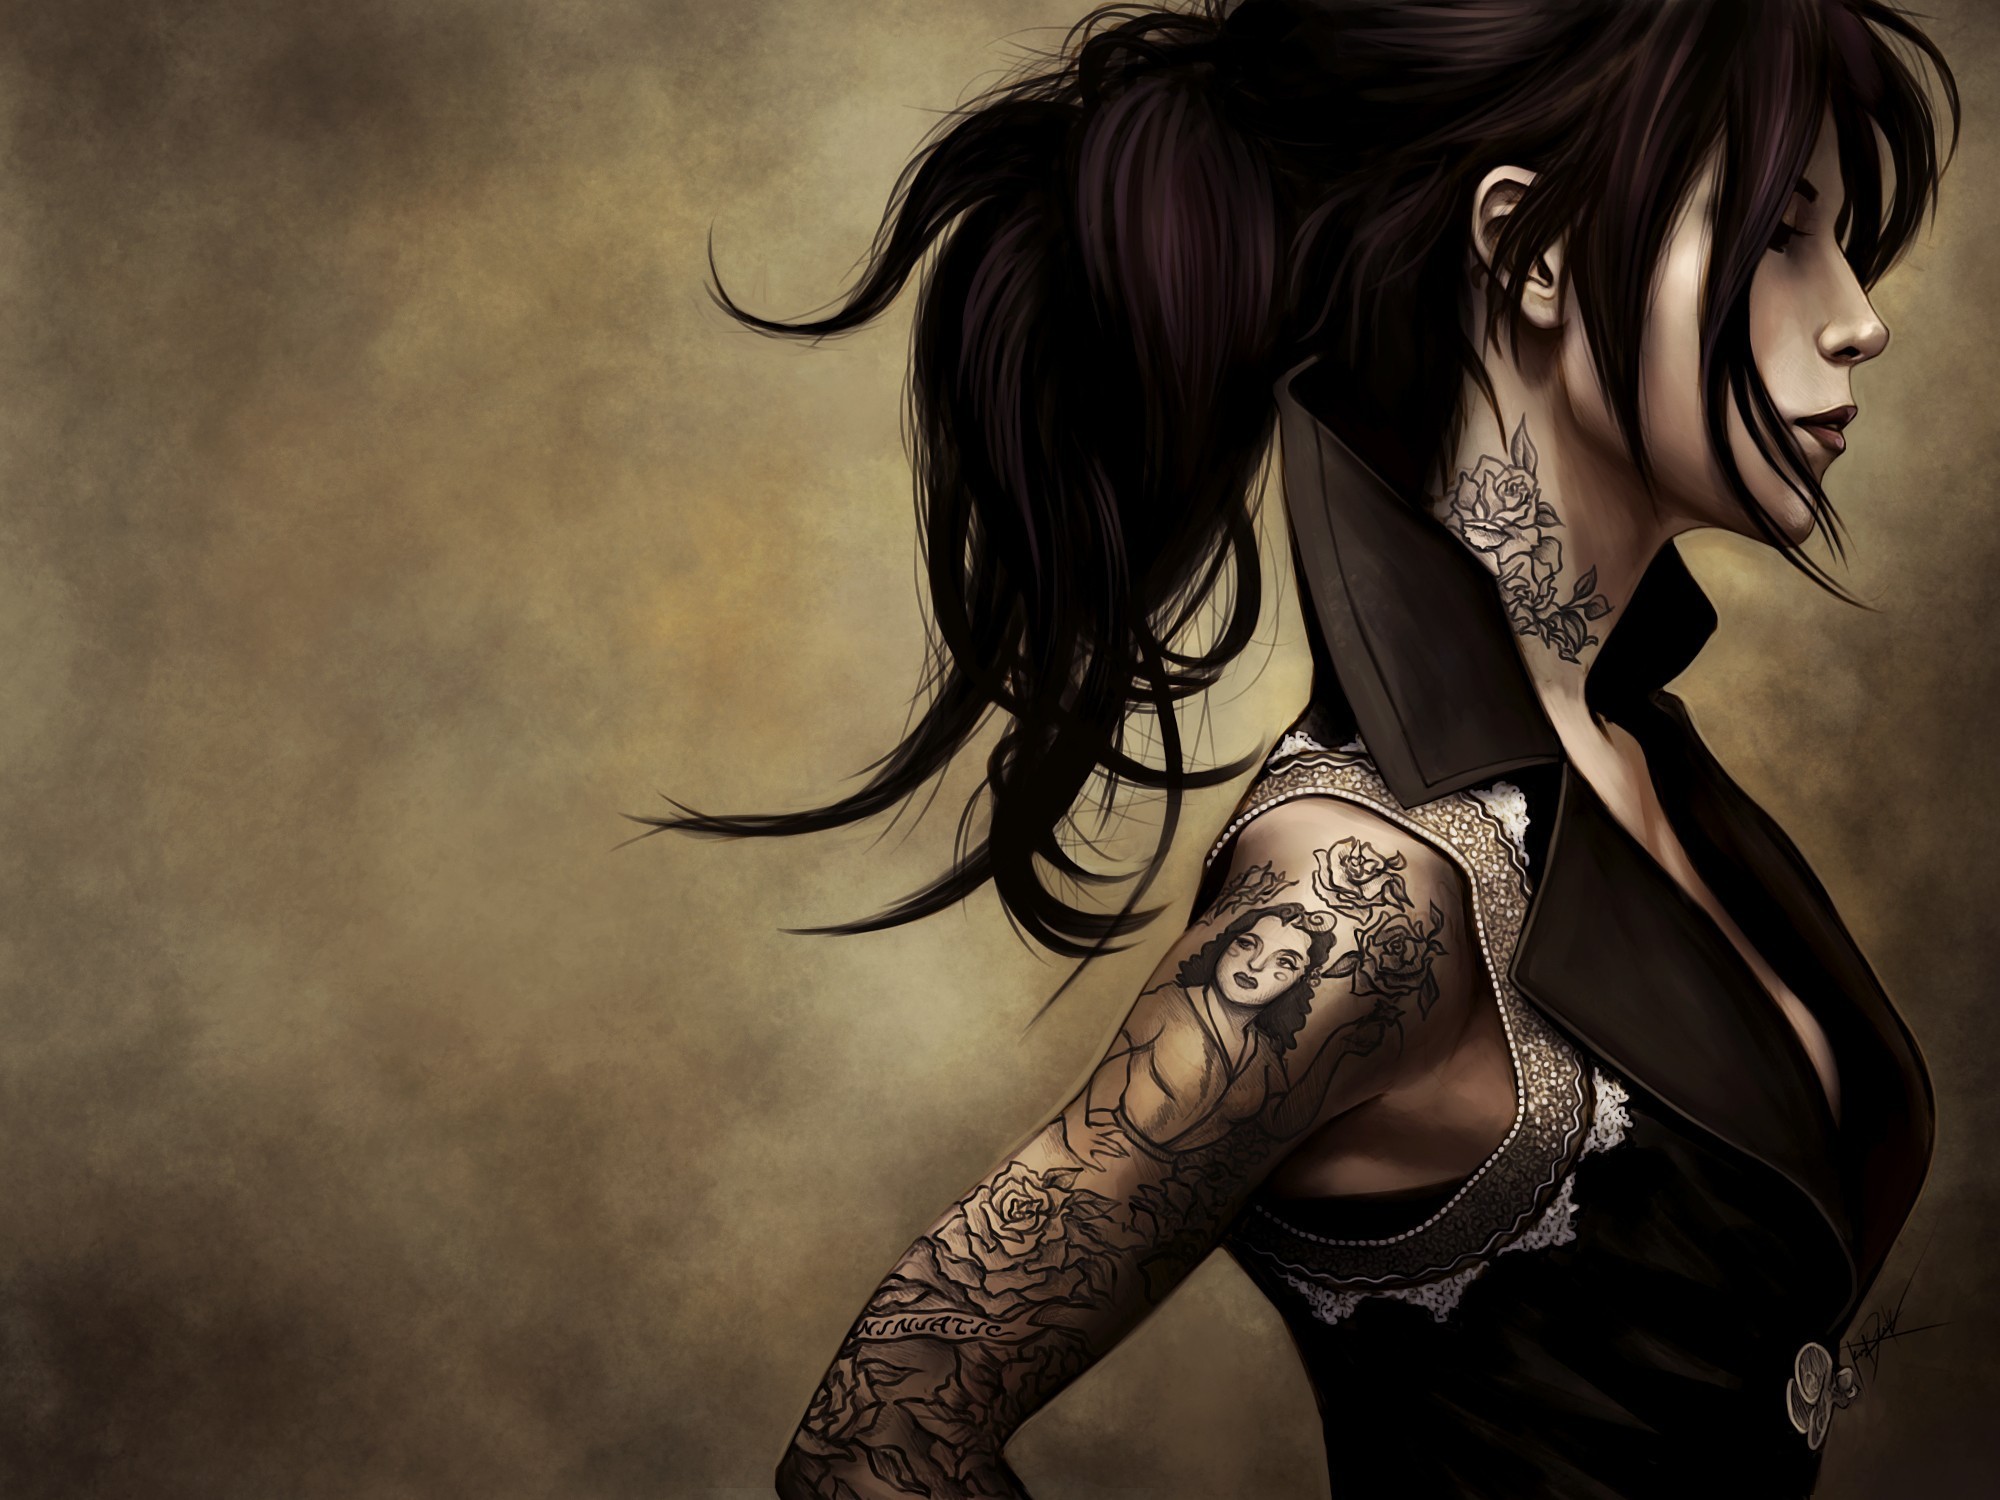 Tattoos wallpapers